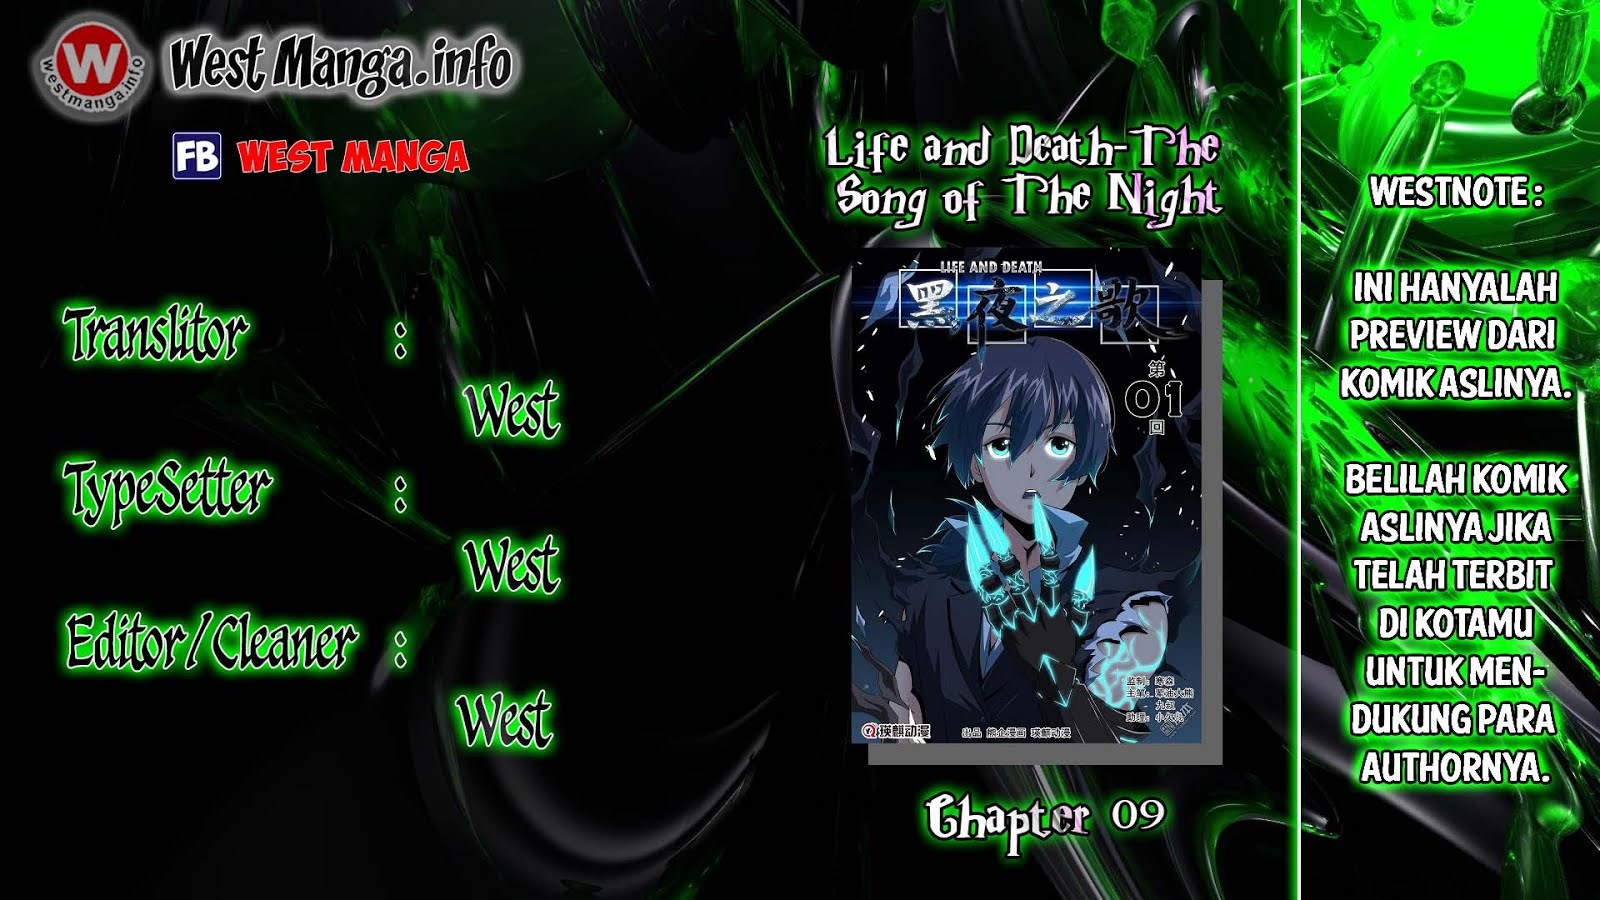 Life and Death-The Song of The Night Chapter 09